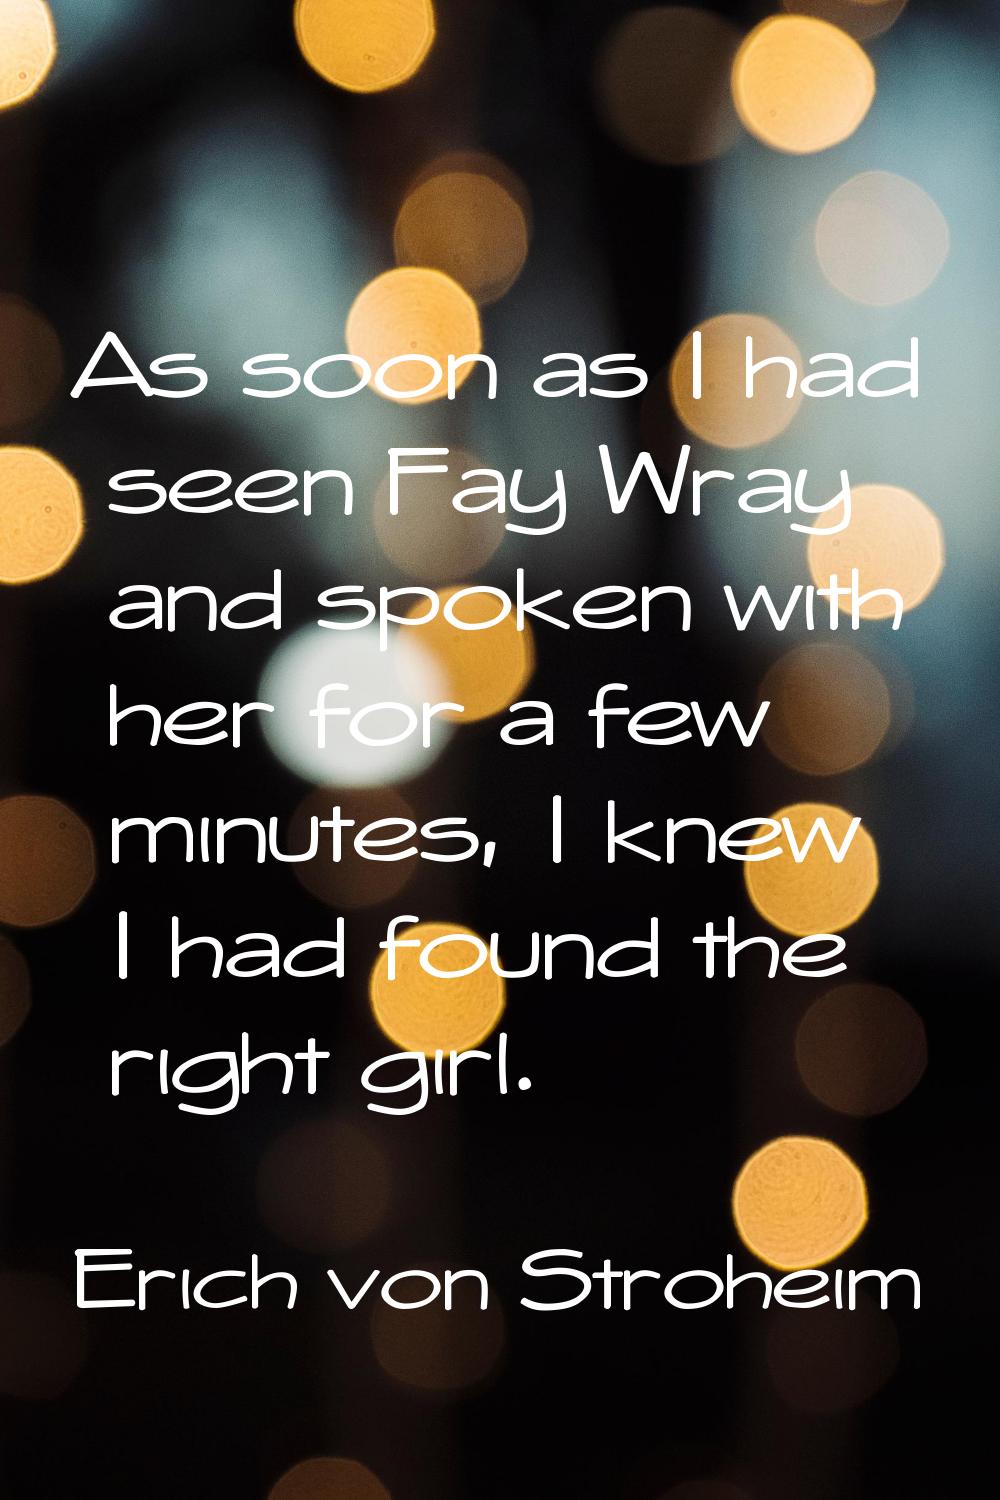 As soon as I had seen Fay Wray and spoken with her for a few minutes, I knew I had found the right 